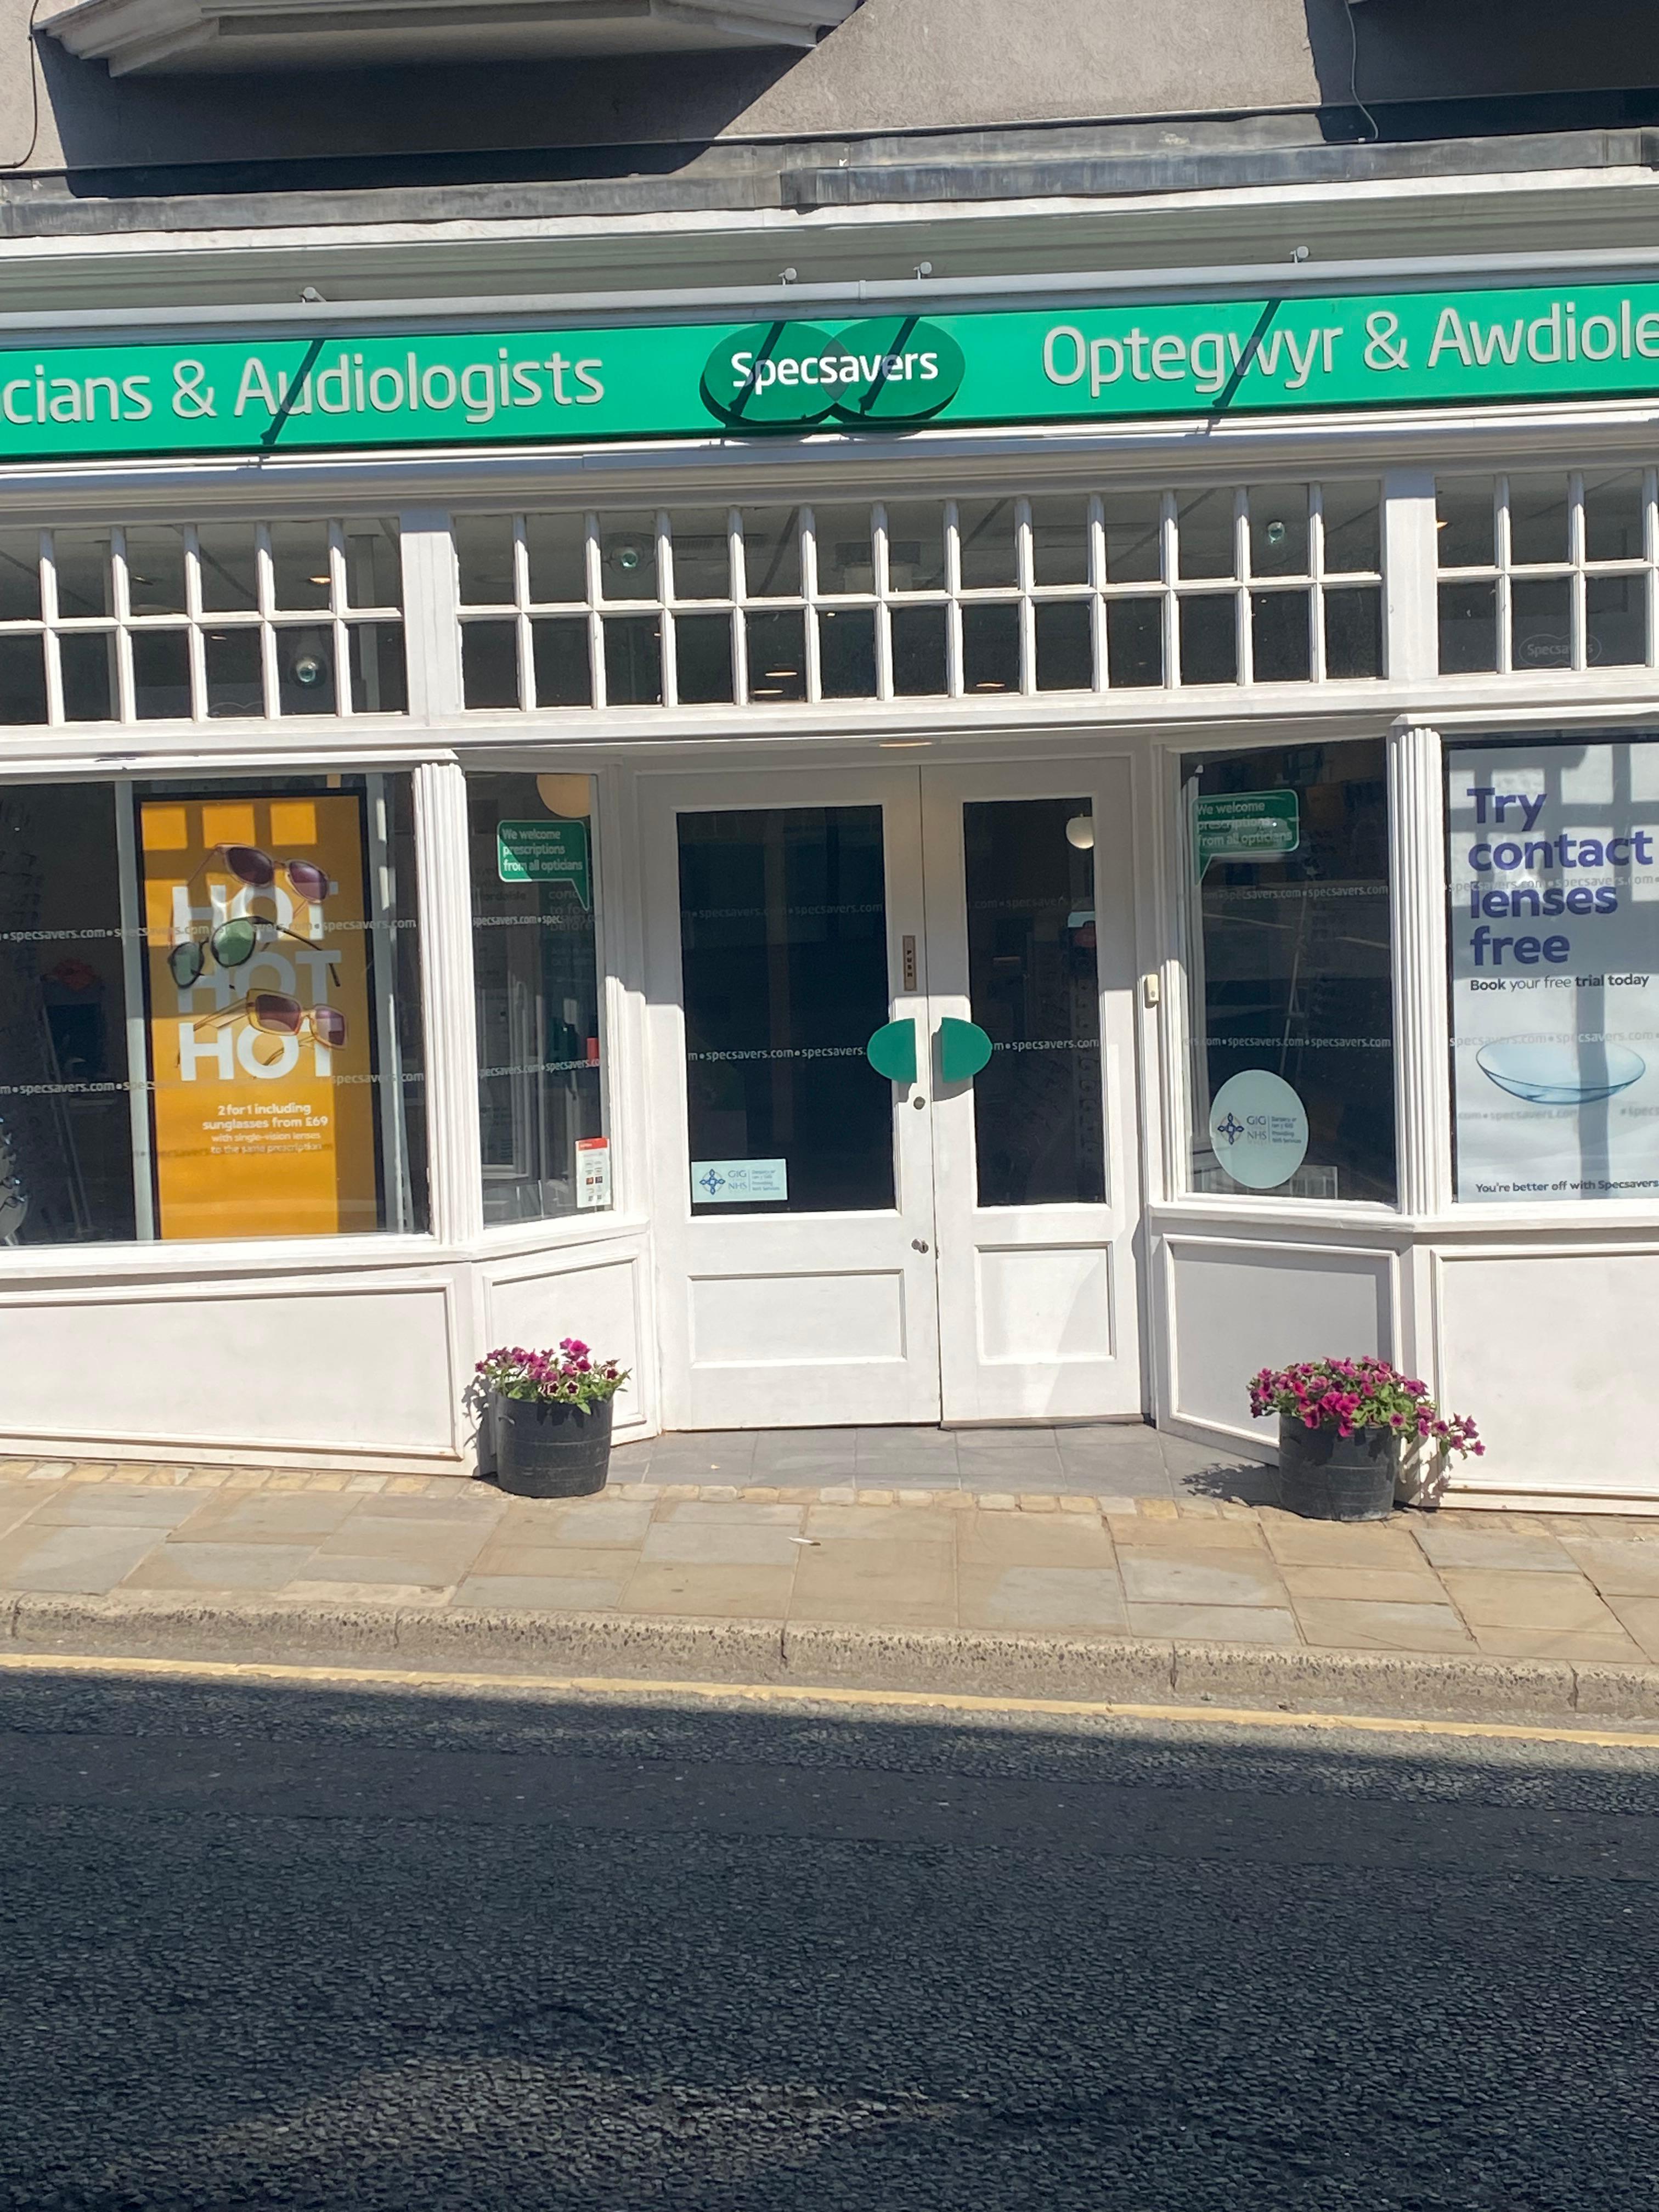 Images Specsavers Opticians and Audiologists - Denbigh